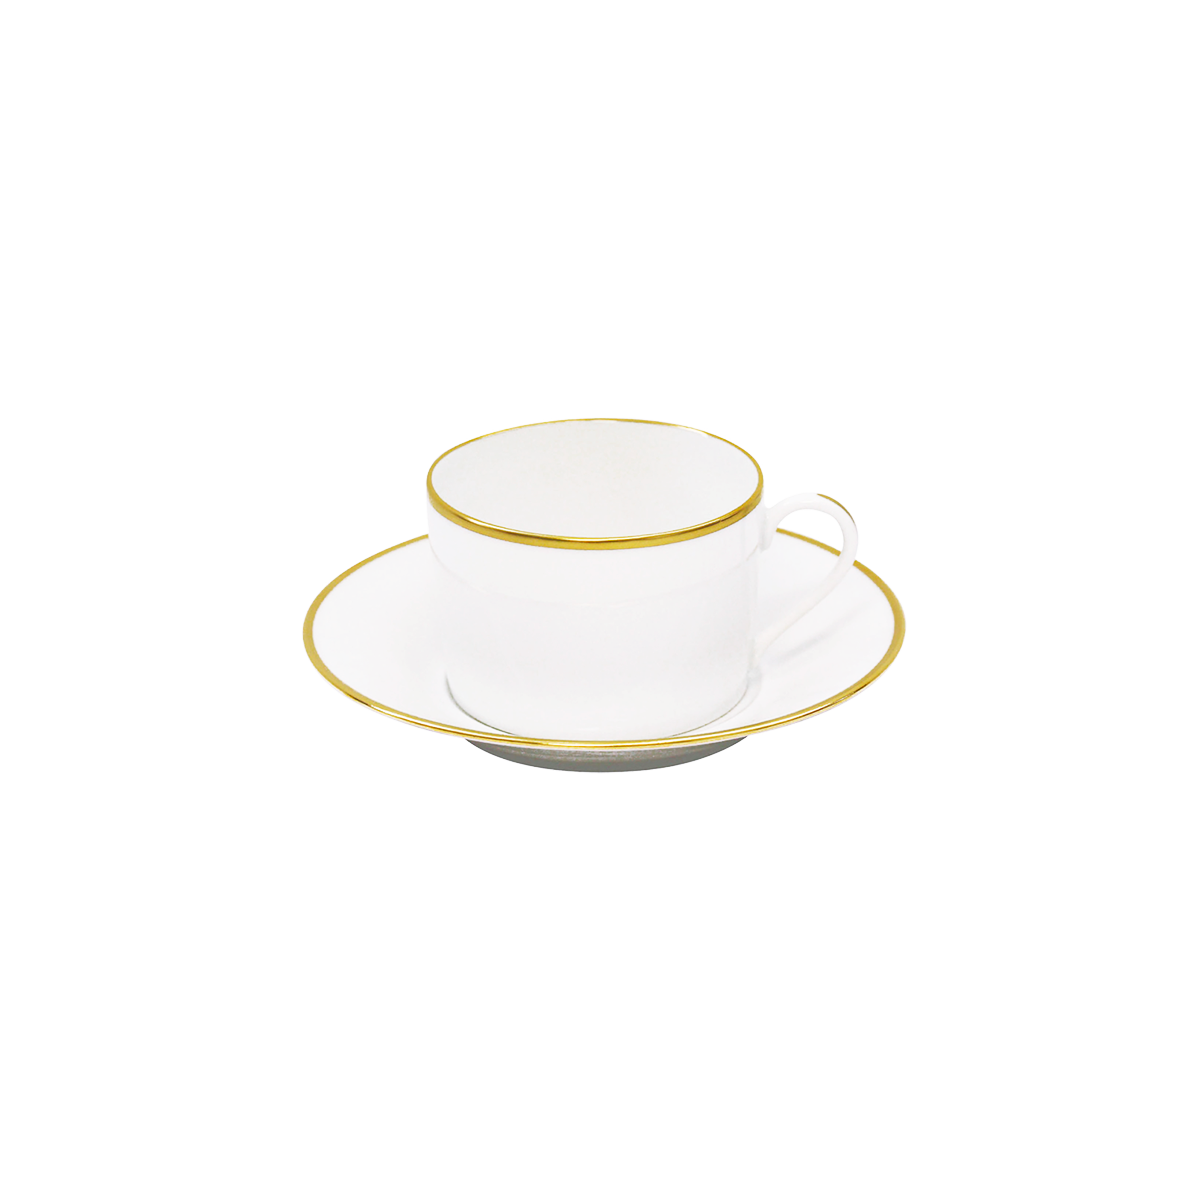 Orsay Teacup And Saucer